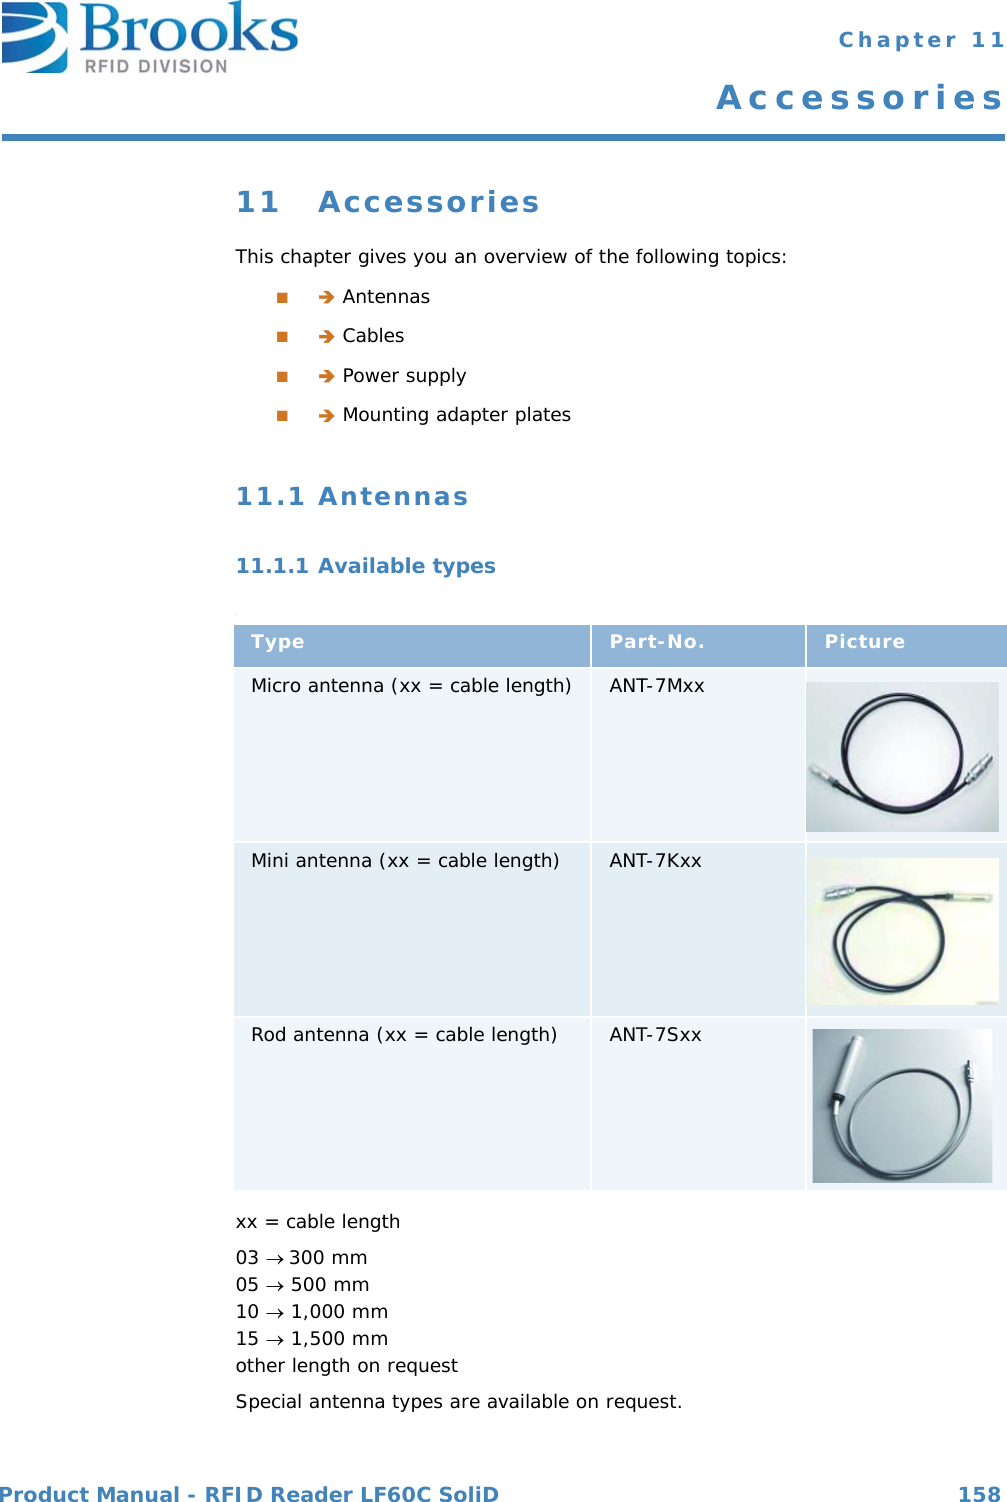 Product Manual - RFID Reader LF60C SoliD 158 Chapter 11Accessories11 AccessoriesThis chapter gives you an overview of the following topics:■ Antennas■ Cables■ Power supply■ Mounting adapter plates11.1 Antennas11.1.1 Available types.xx = cable length03 300 mm05  500 mm10  1,000 mm15  1,500 mmother length on requestSpecial antenna types are available on request.Type Part-No. PictureMicro antenna (xx = cable length) ANT-7MxxMini antenna (xx = cable length) ANT-7KxxRod antenna (xx = cable length) ANT-7Sxx